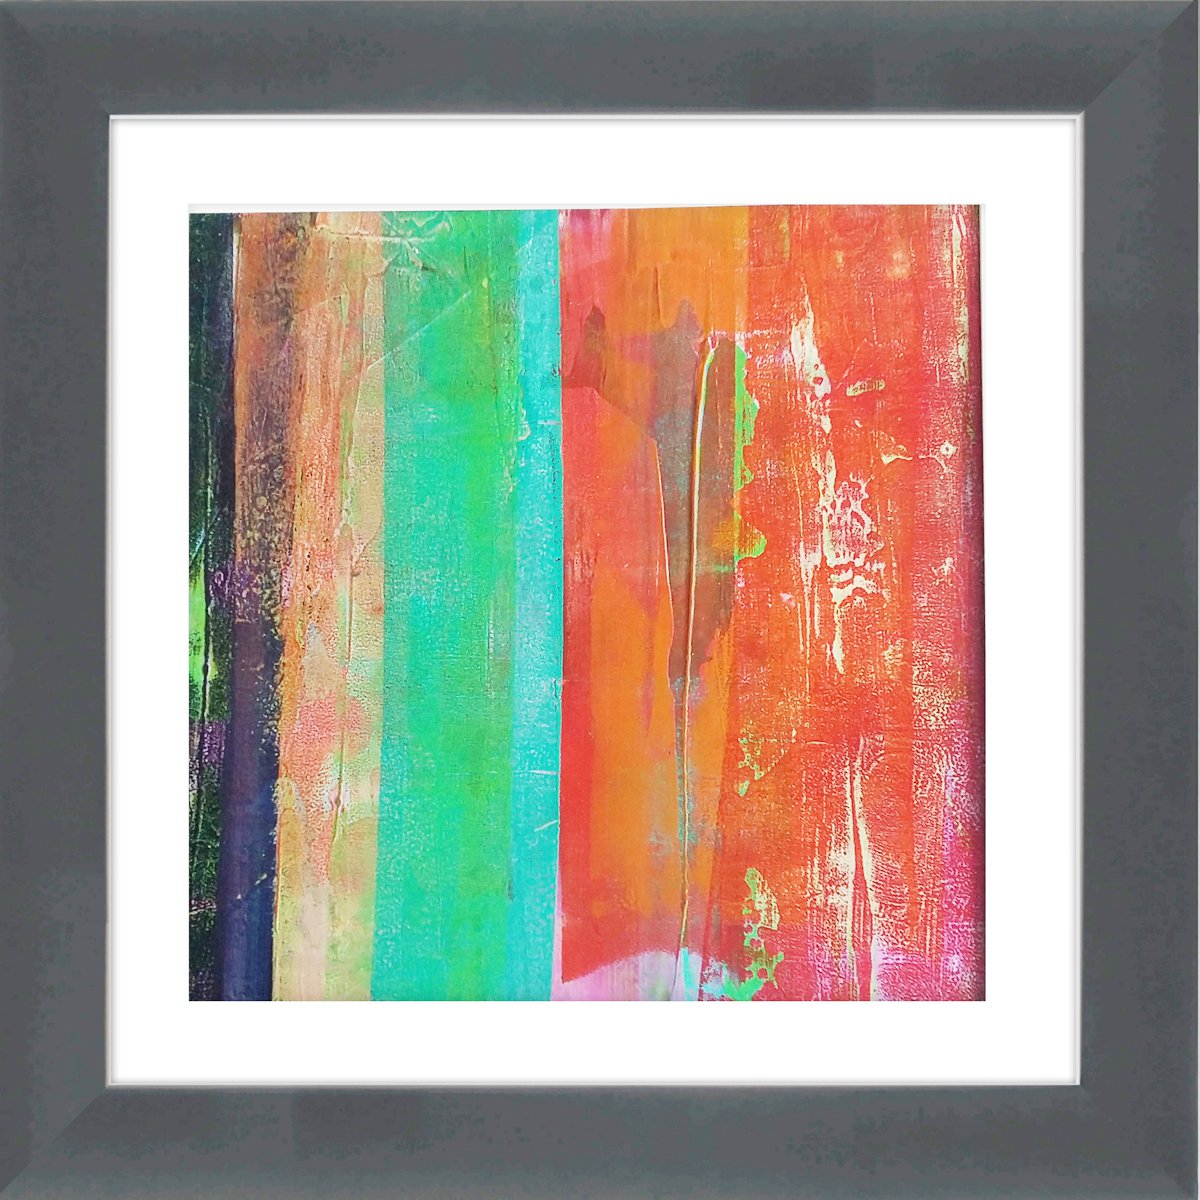 Abstraction #22 by Carolynne Coulson